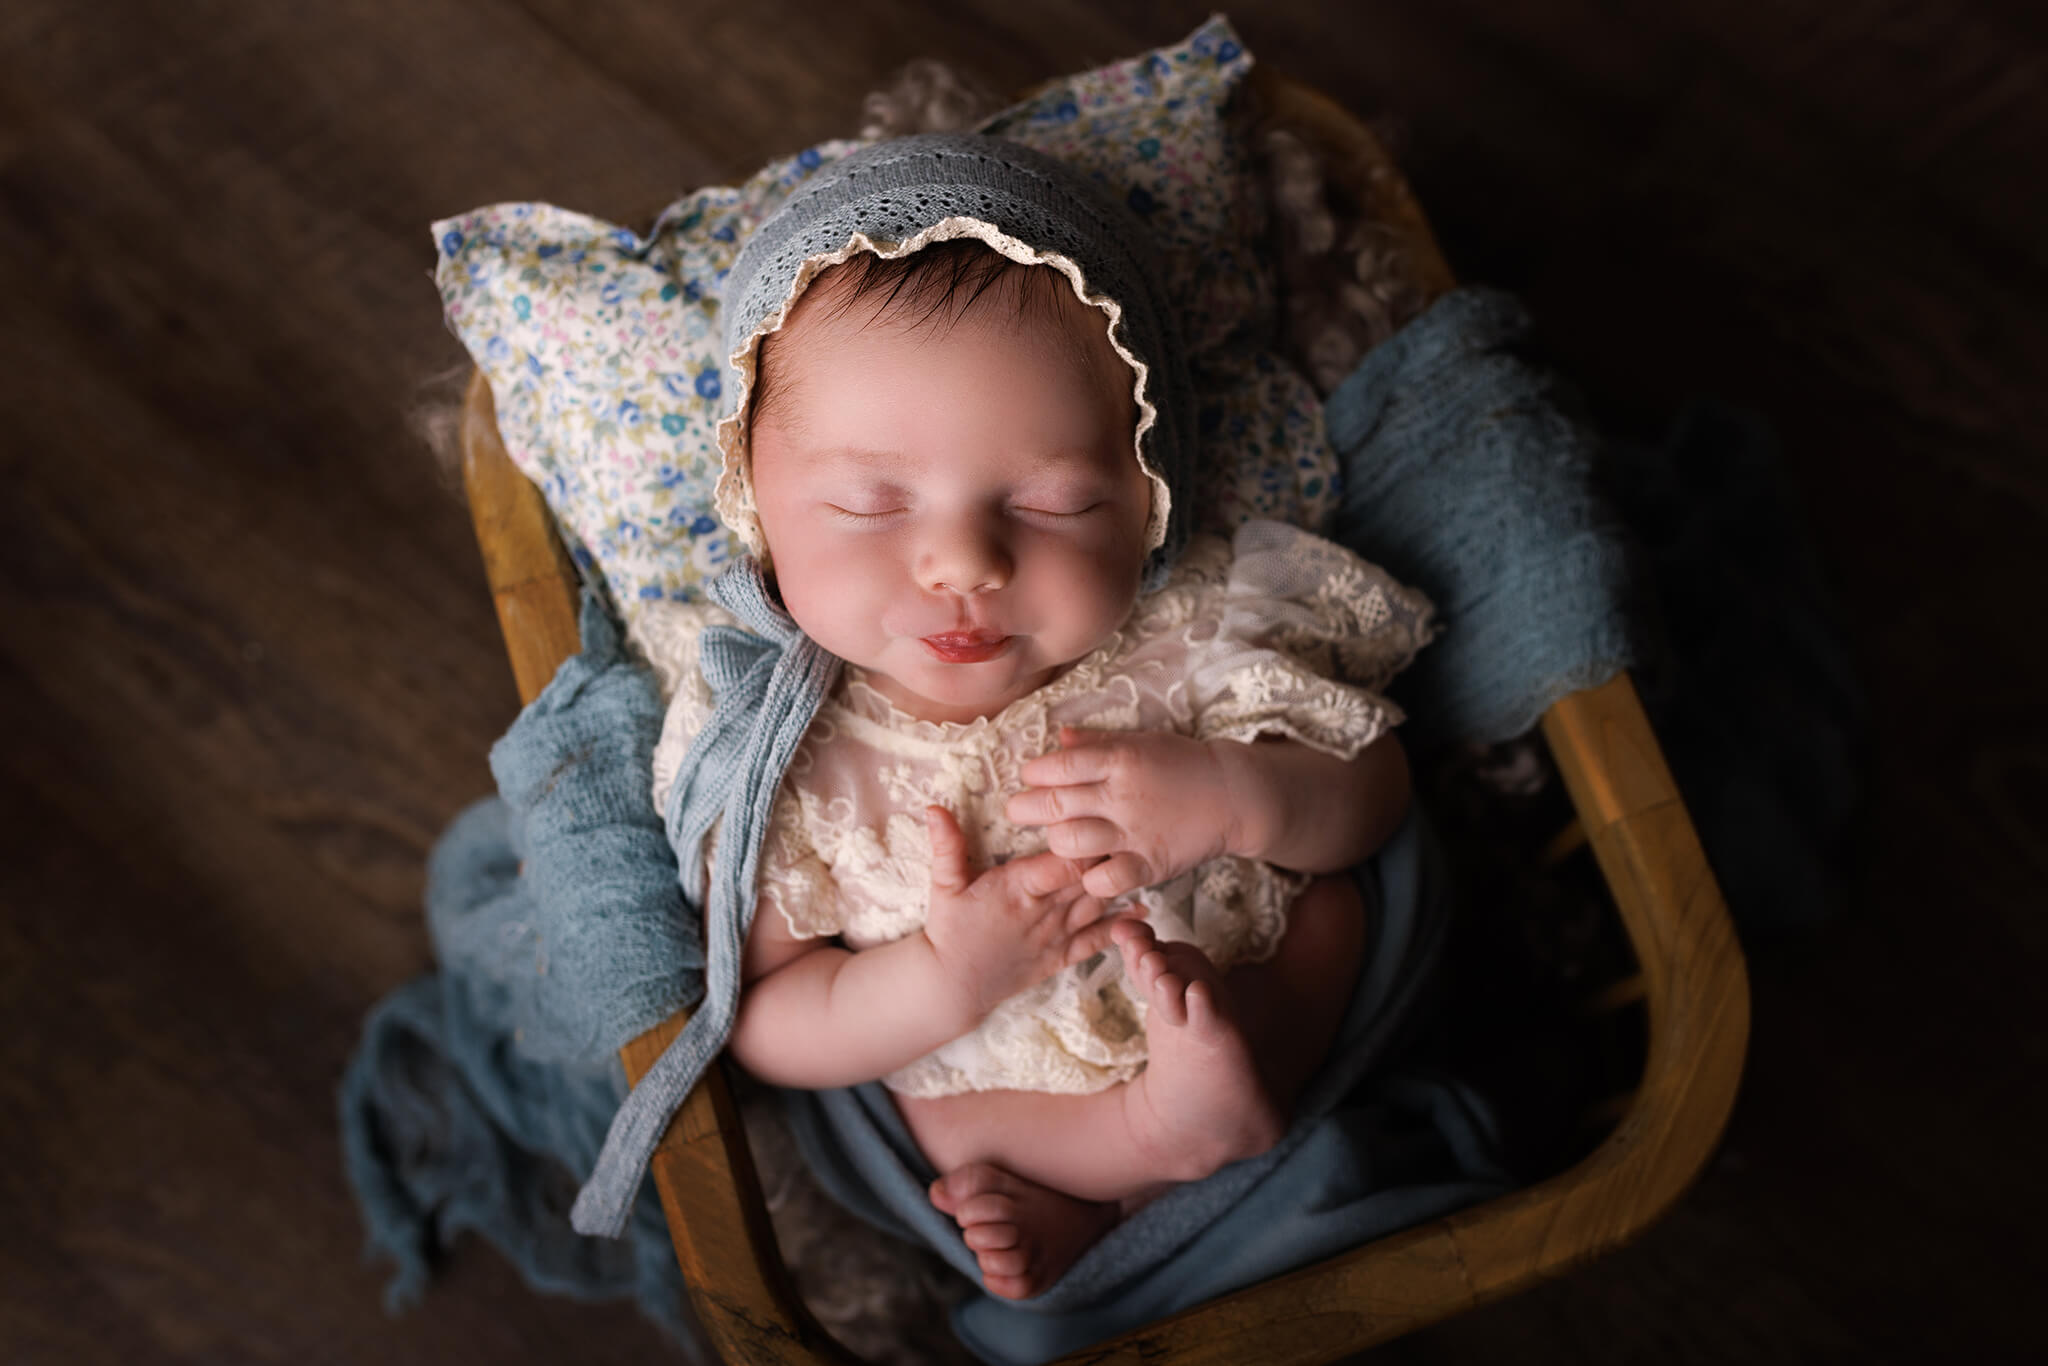 A newborn baby sleeps in a lace dress and blue bonnet